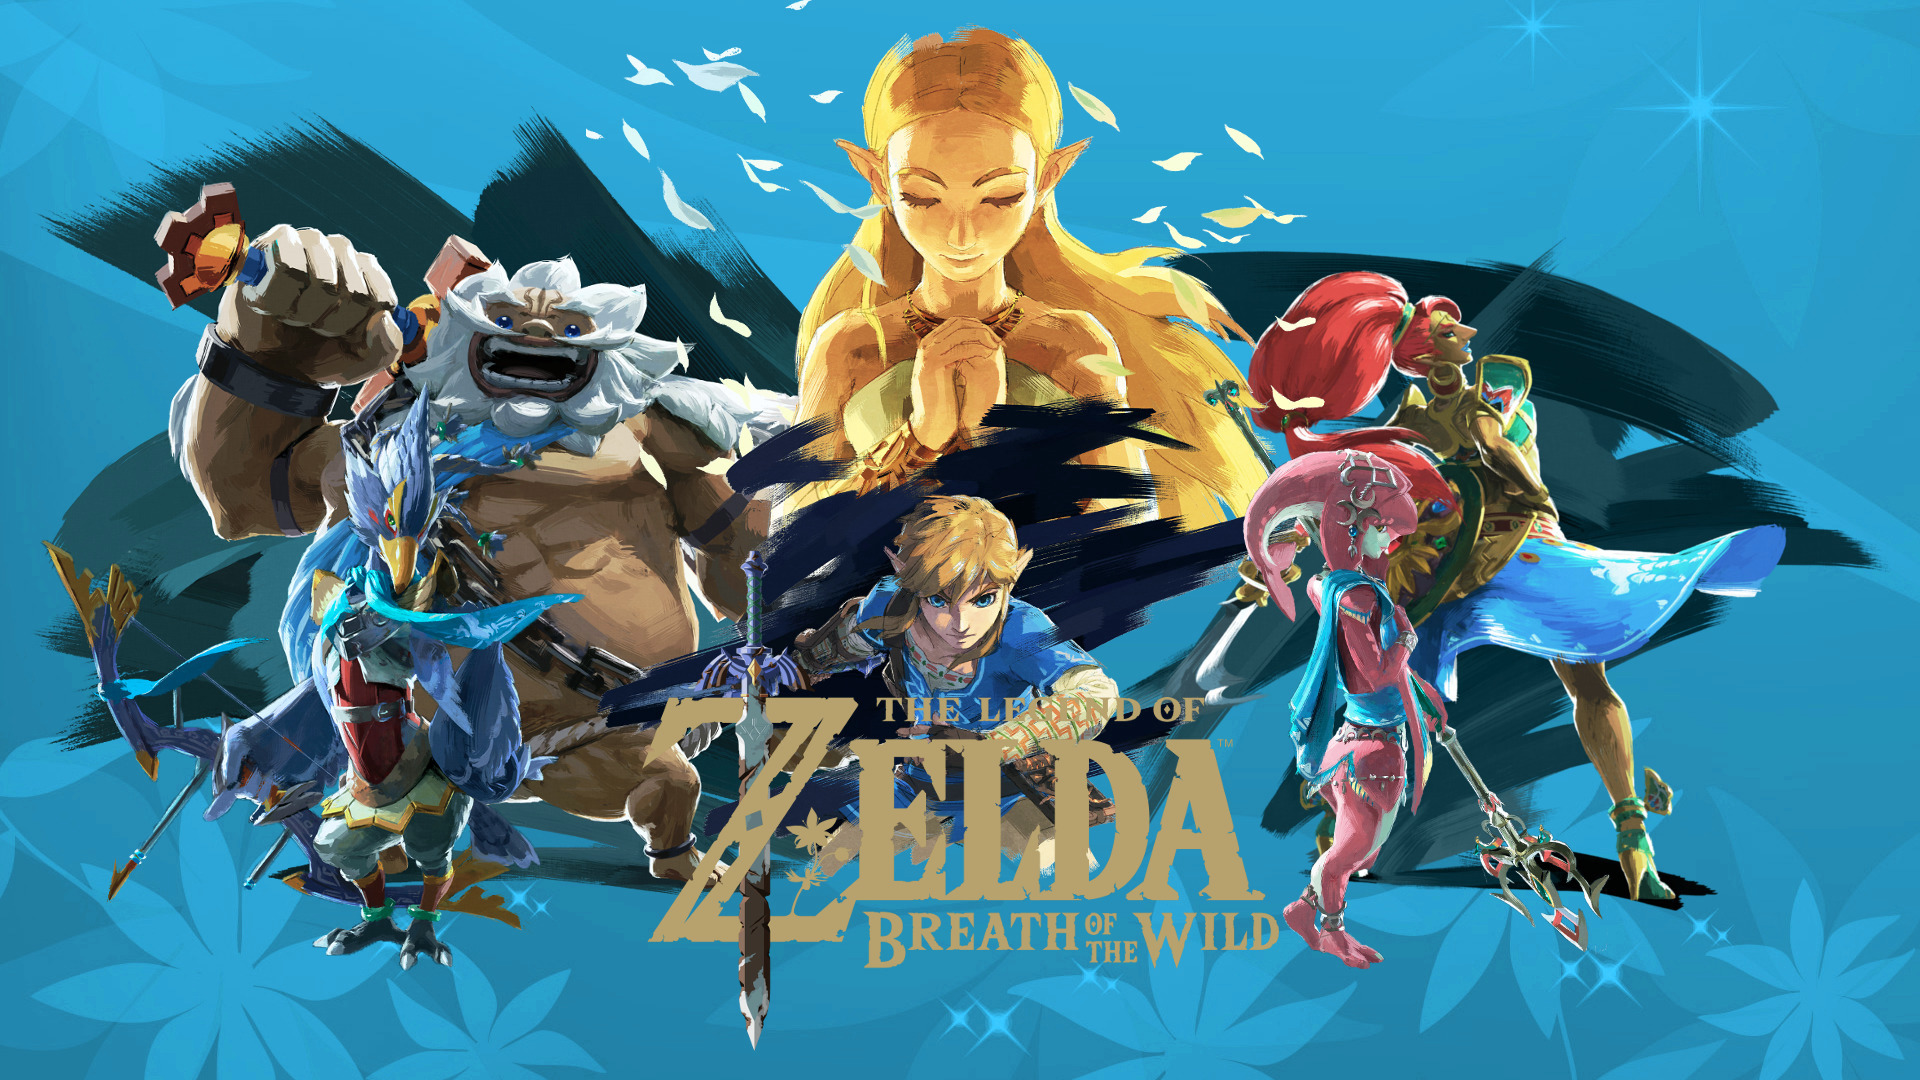 The legend of zelda breath of the wild steam фото 11